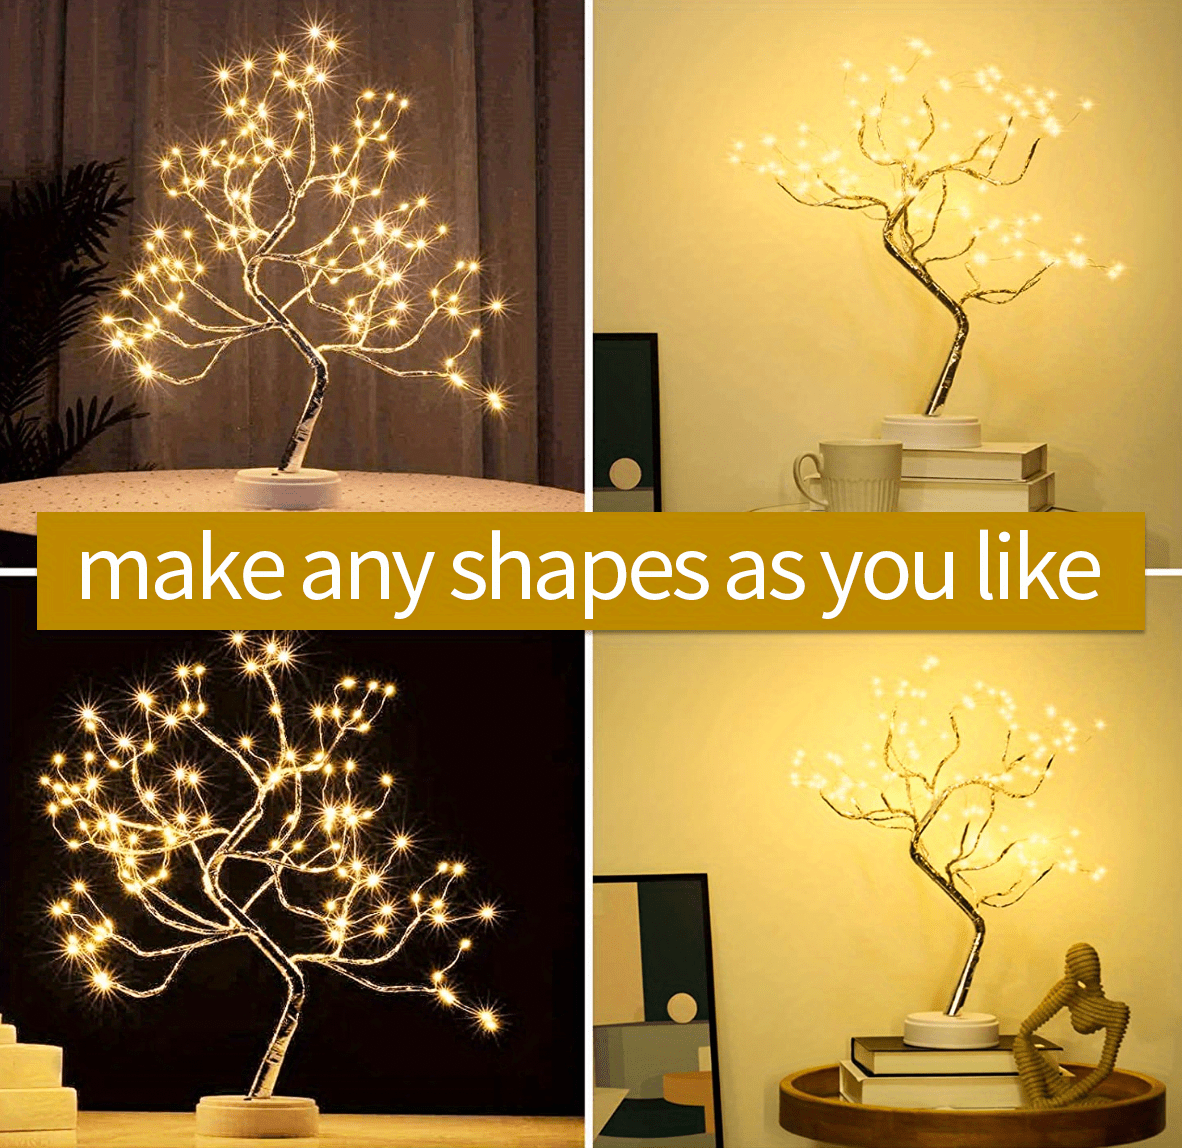 Tabletop Bonsai Tree Light with 108 LED Copper Wire String Lights, DIY  Artificial Tree Lamp, Battery/USB Operated